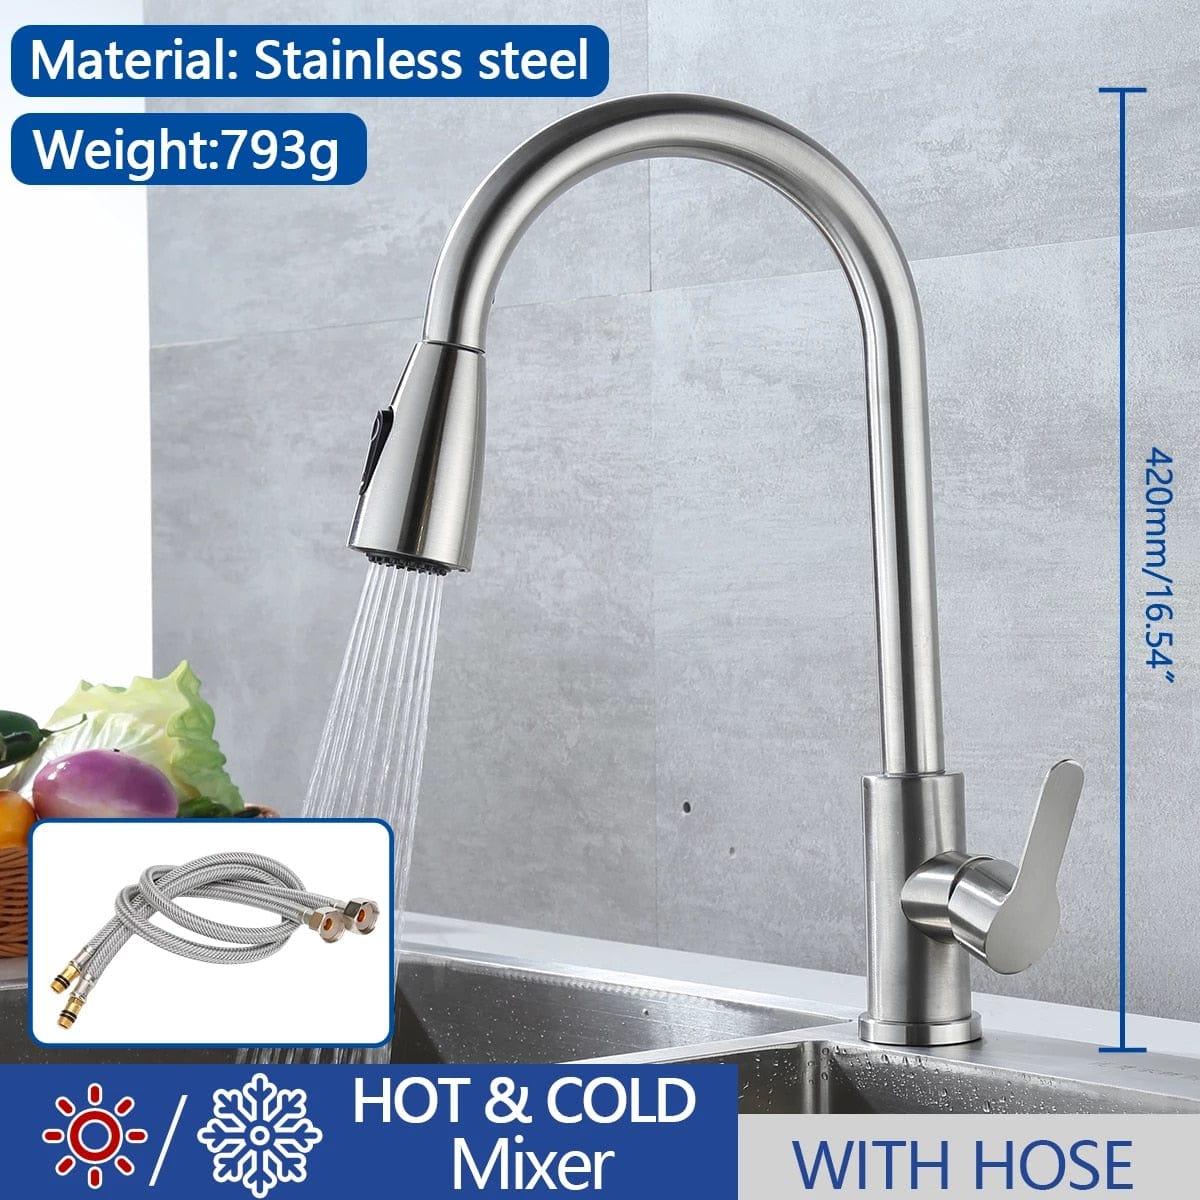 Shop 0 CP11 add Hose / China Kitchen Faucet Stainless Steel Faucets Hot Cold Water Mixer Tap 2 Function Stream Sprayer Single Handle Pull Out Kitchen Taps Mademoiselle Home Decor